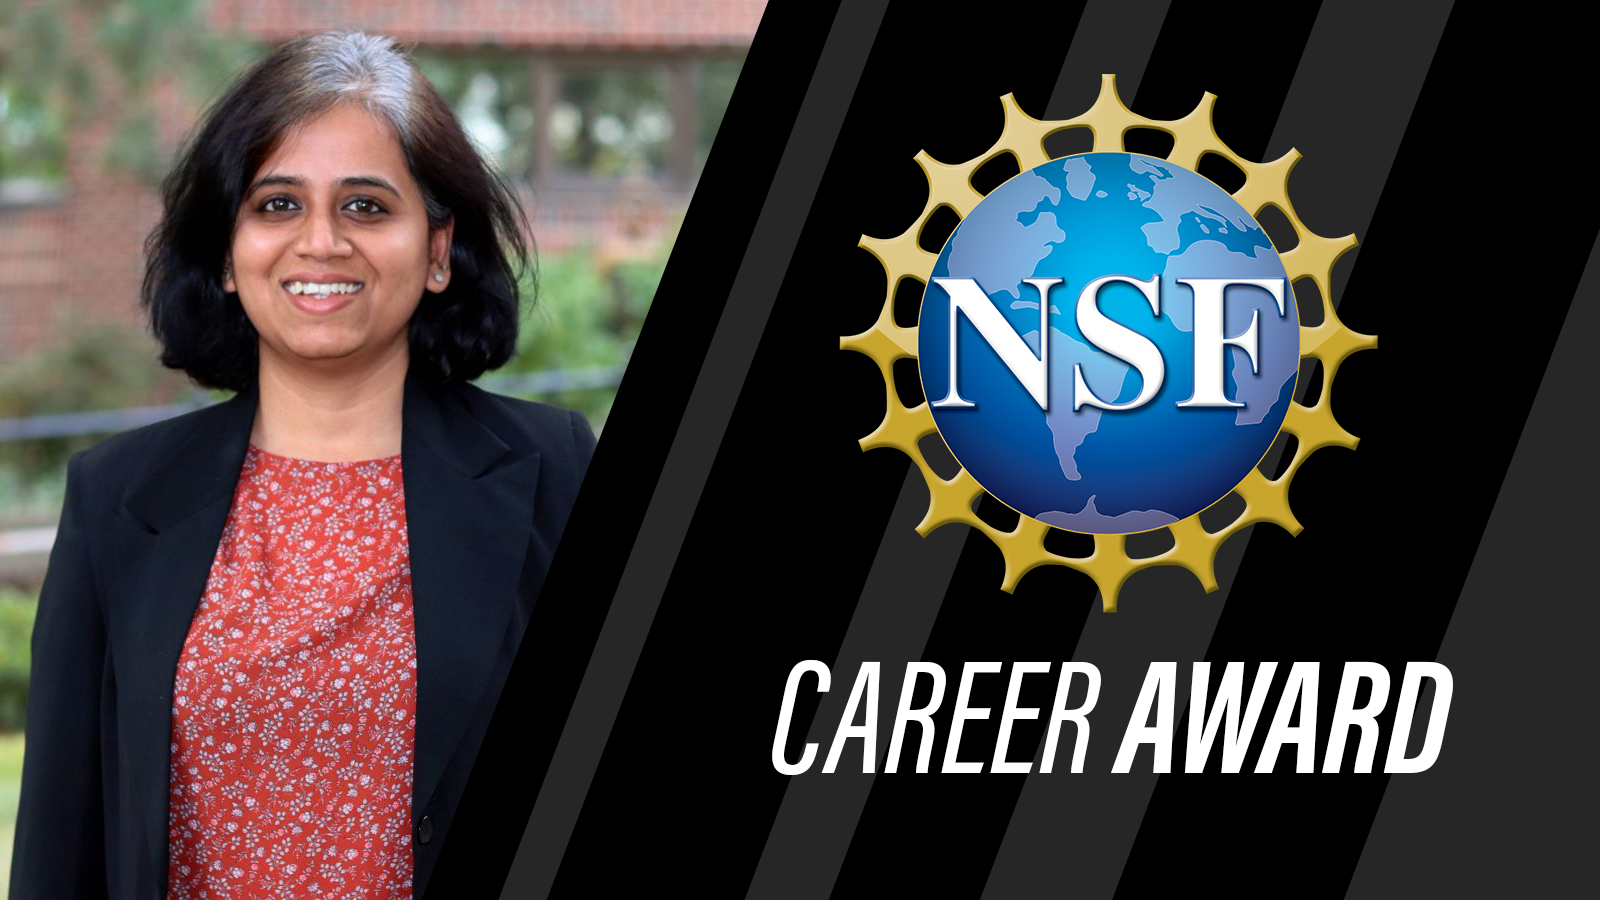 Romila Pradhan became a faculty member in Purdue Polytechnic's Department of Computer and Information Technology in 2019. (Purdue Polytechnic/John O'Malley and NSF logo)